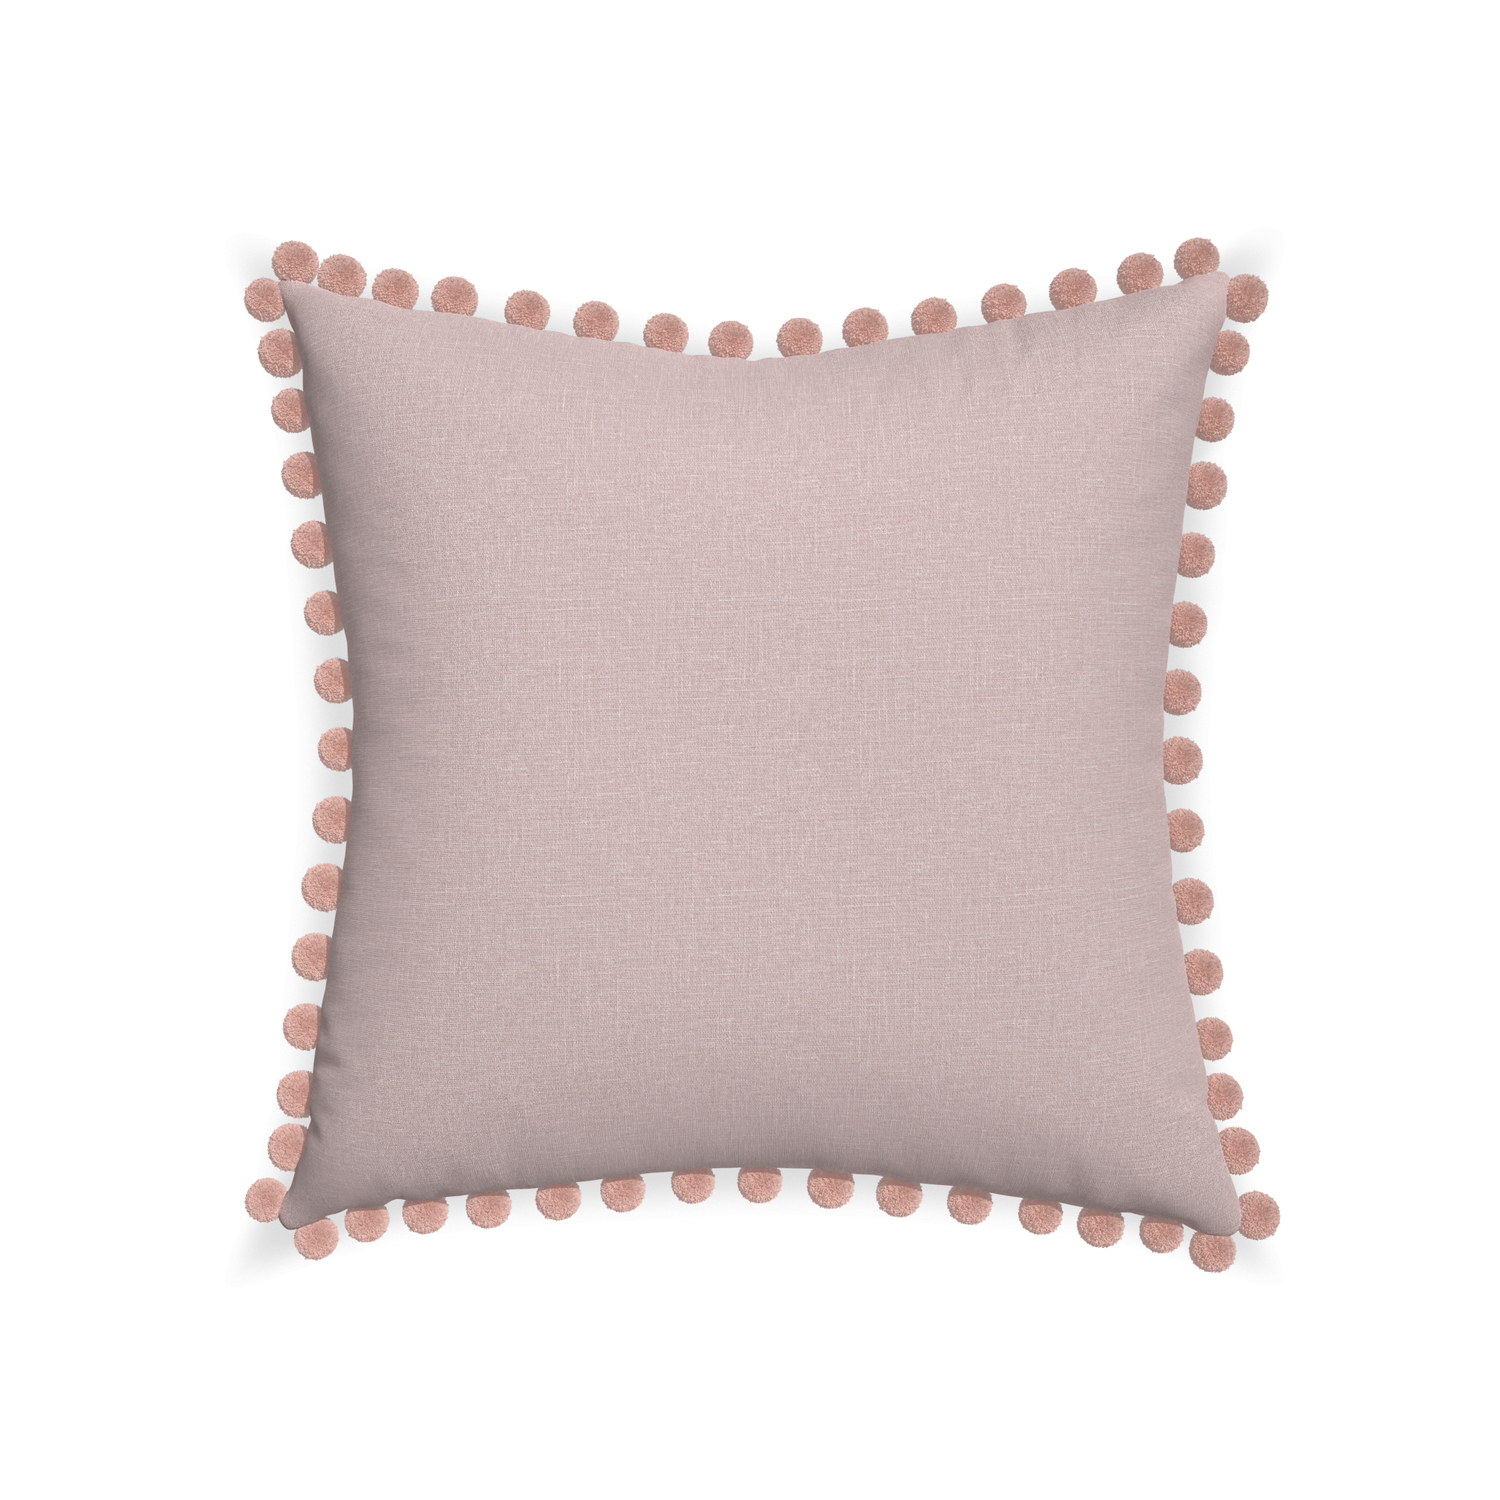 22-square orchid custom mauve pinkpillow with rose pom pom on white background